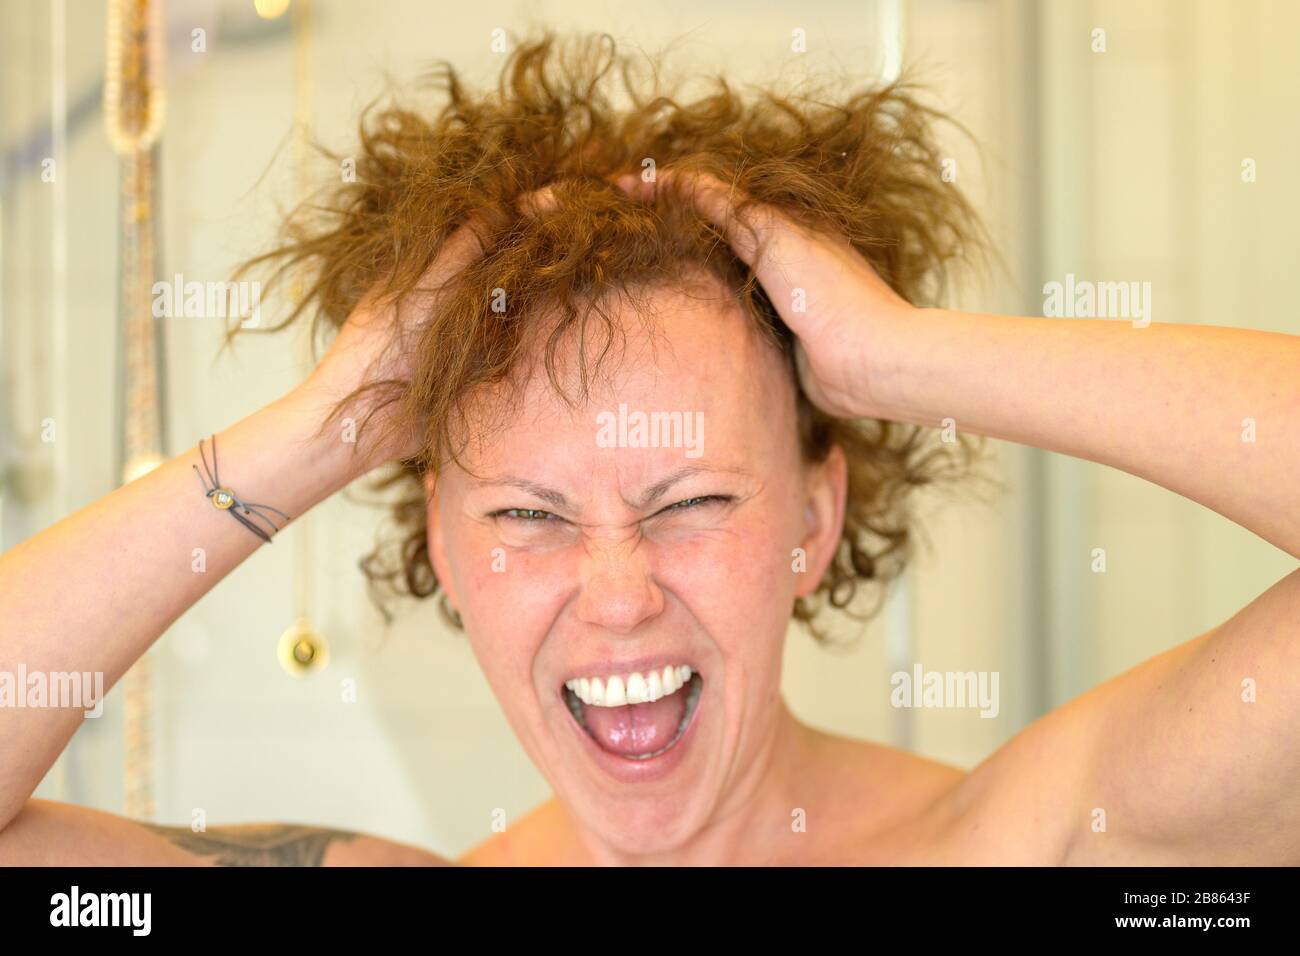 Frustrated woman having a bad hair day running her hands through her unruly curly hair and yelling in a close up head shot Stock Photo